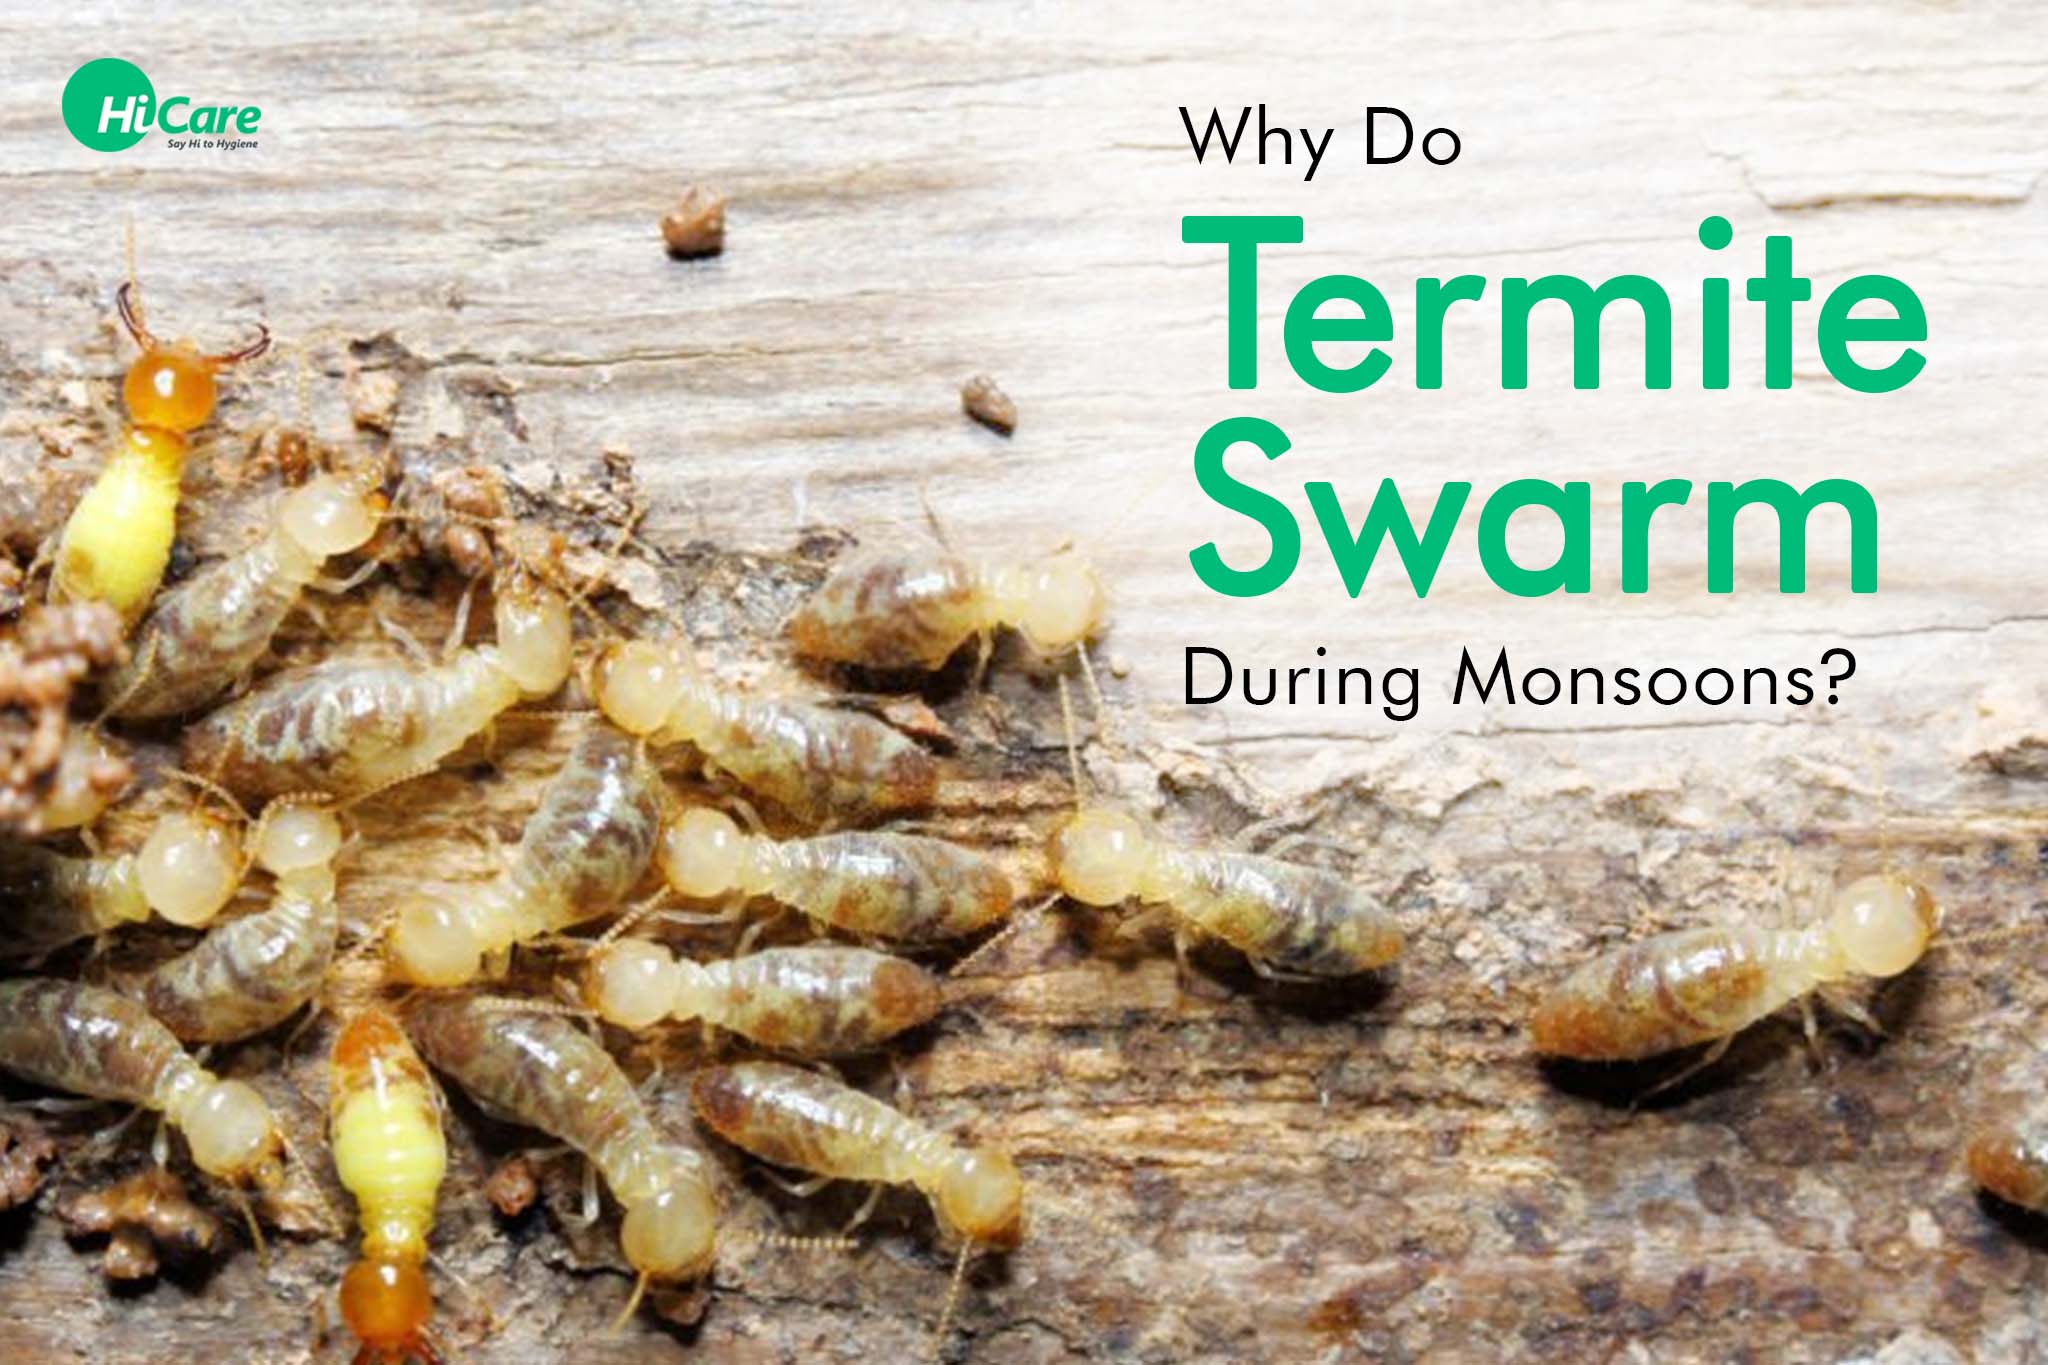 Why Do Termites Swarm During Monsoons?